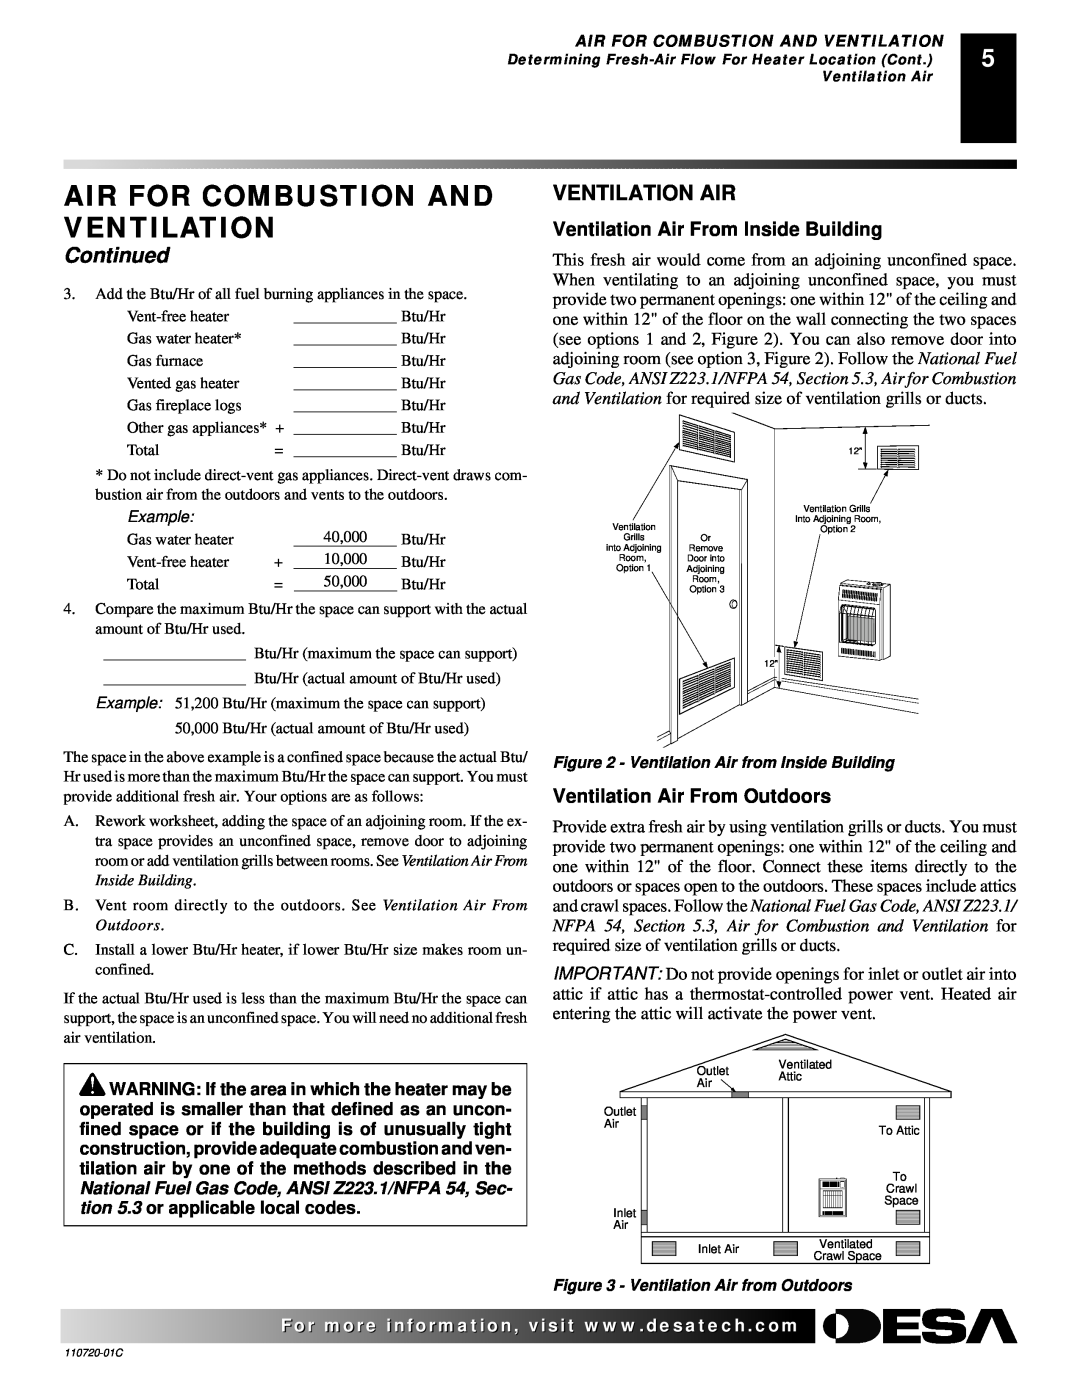 Desa VN10A Air For Combustion And, Ventilation Air From Inside Building, Ventilation Air From Outdoors, Continued 